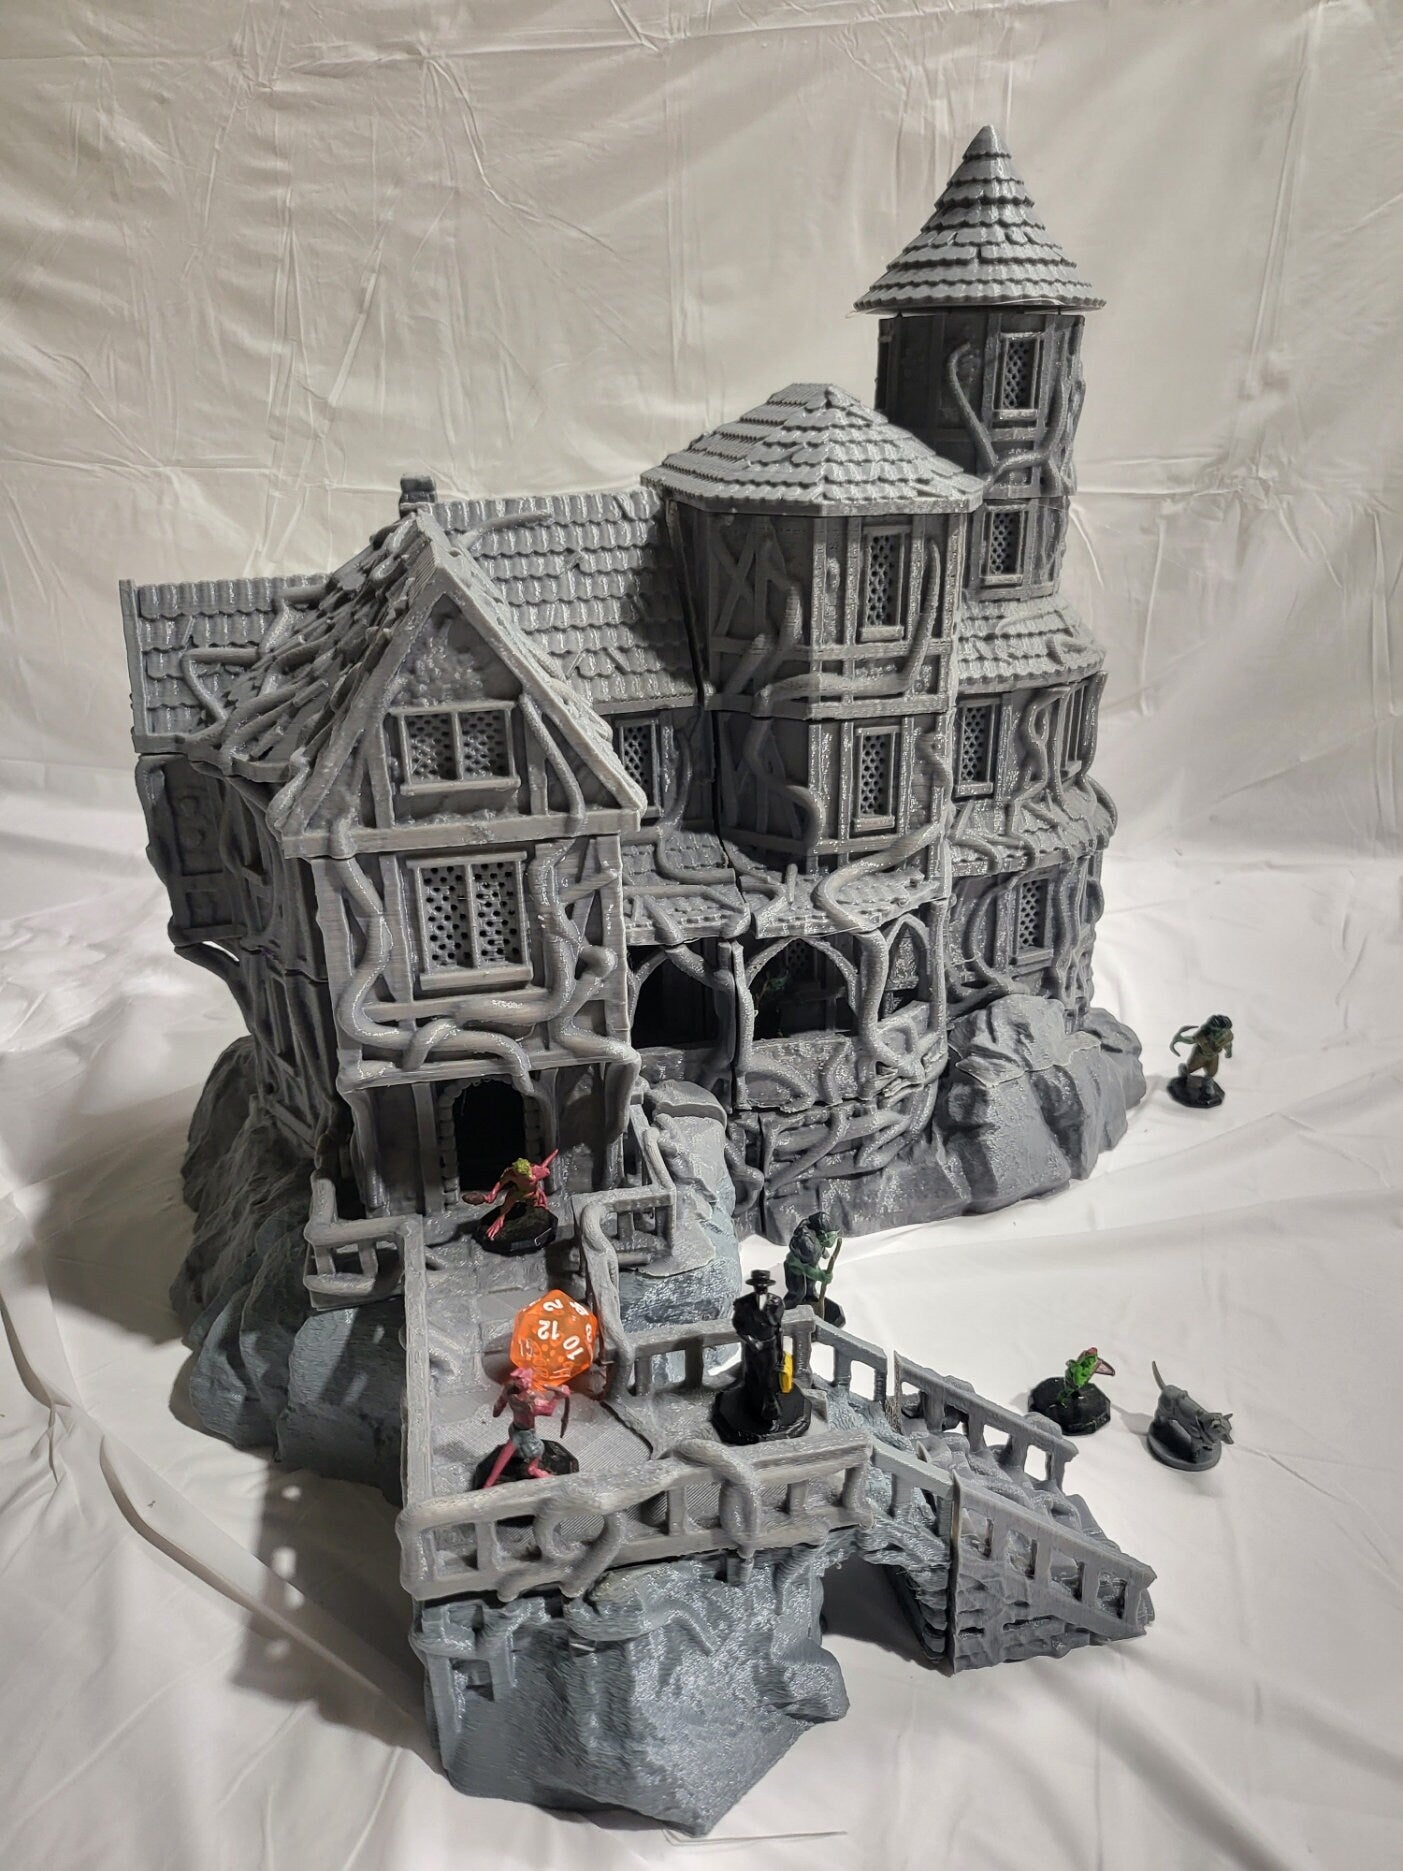 Cultist Manor, Forgotten Manor, Secluded Manor, Dungeons and Dragons, Lunatic Hideout, Chaotic terrain